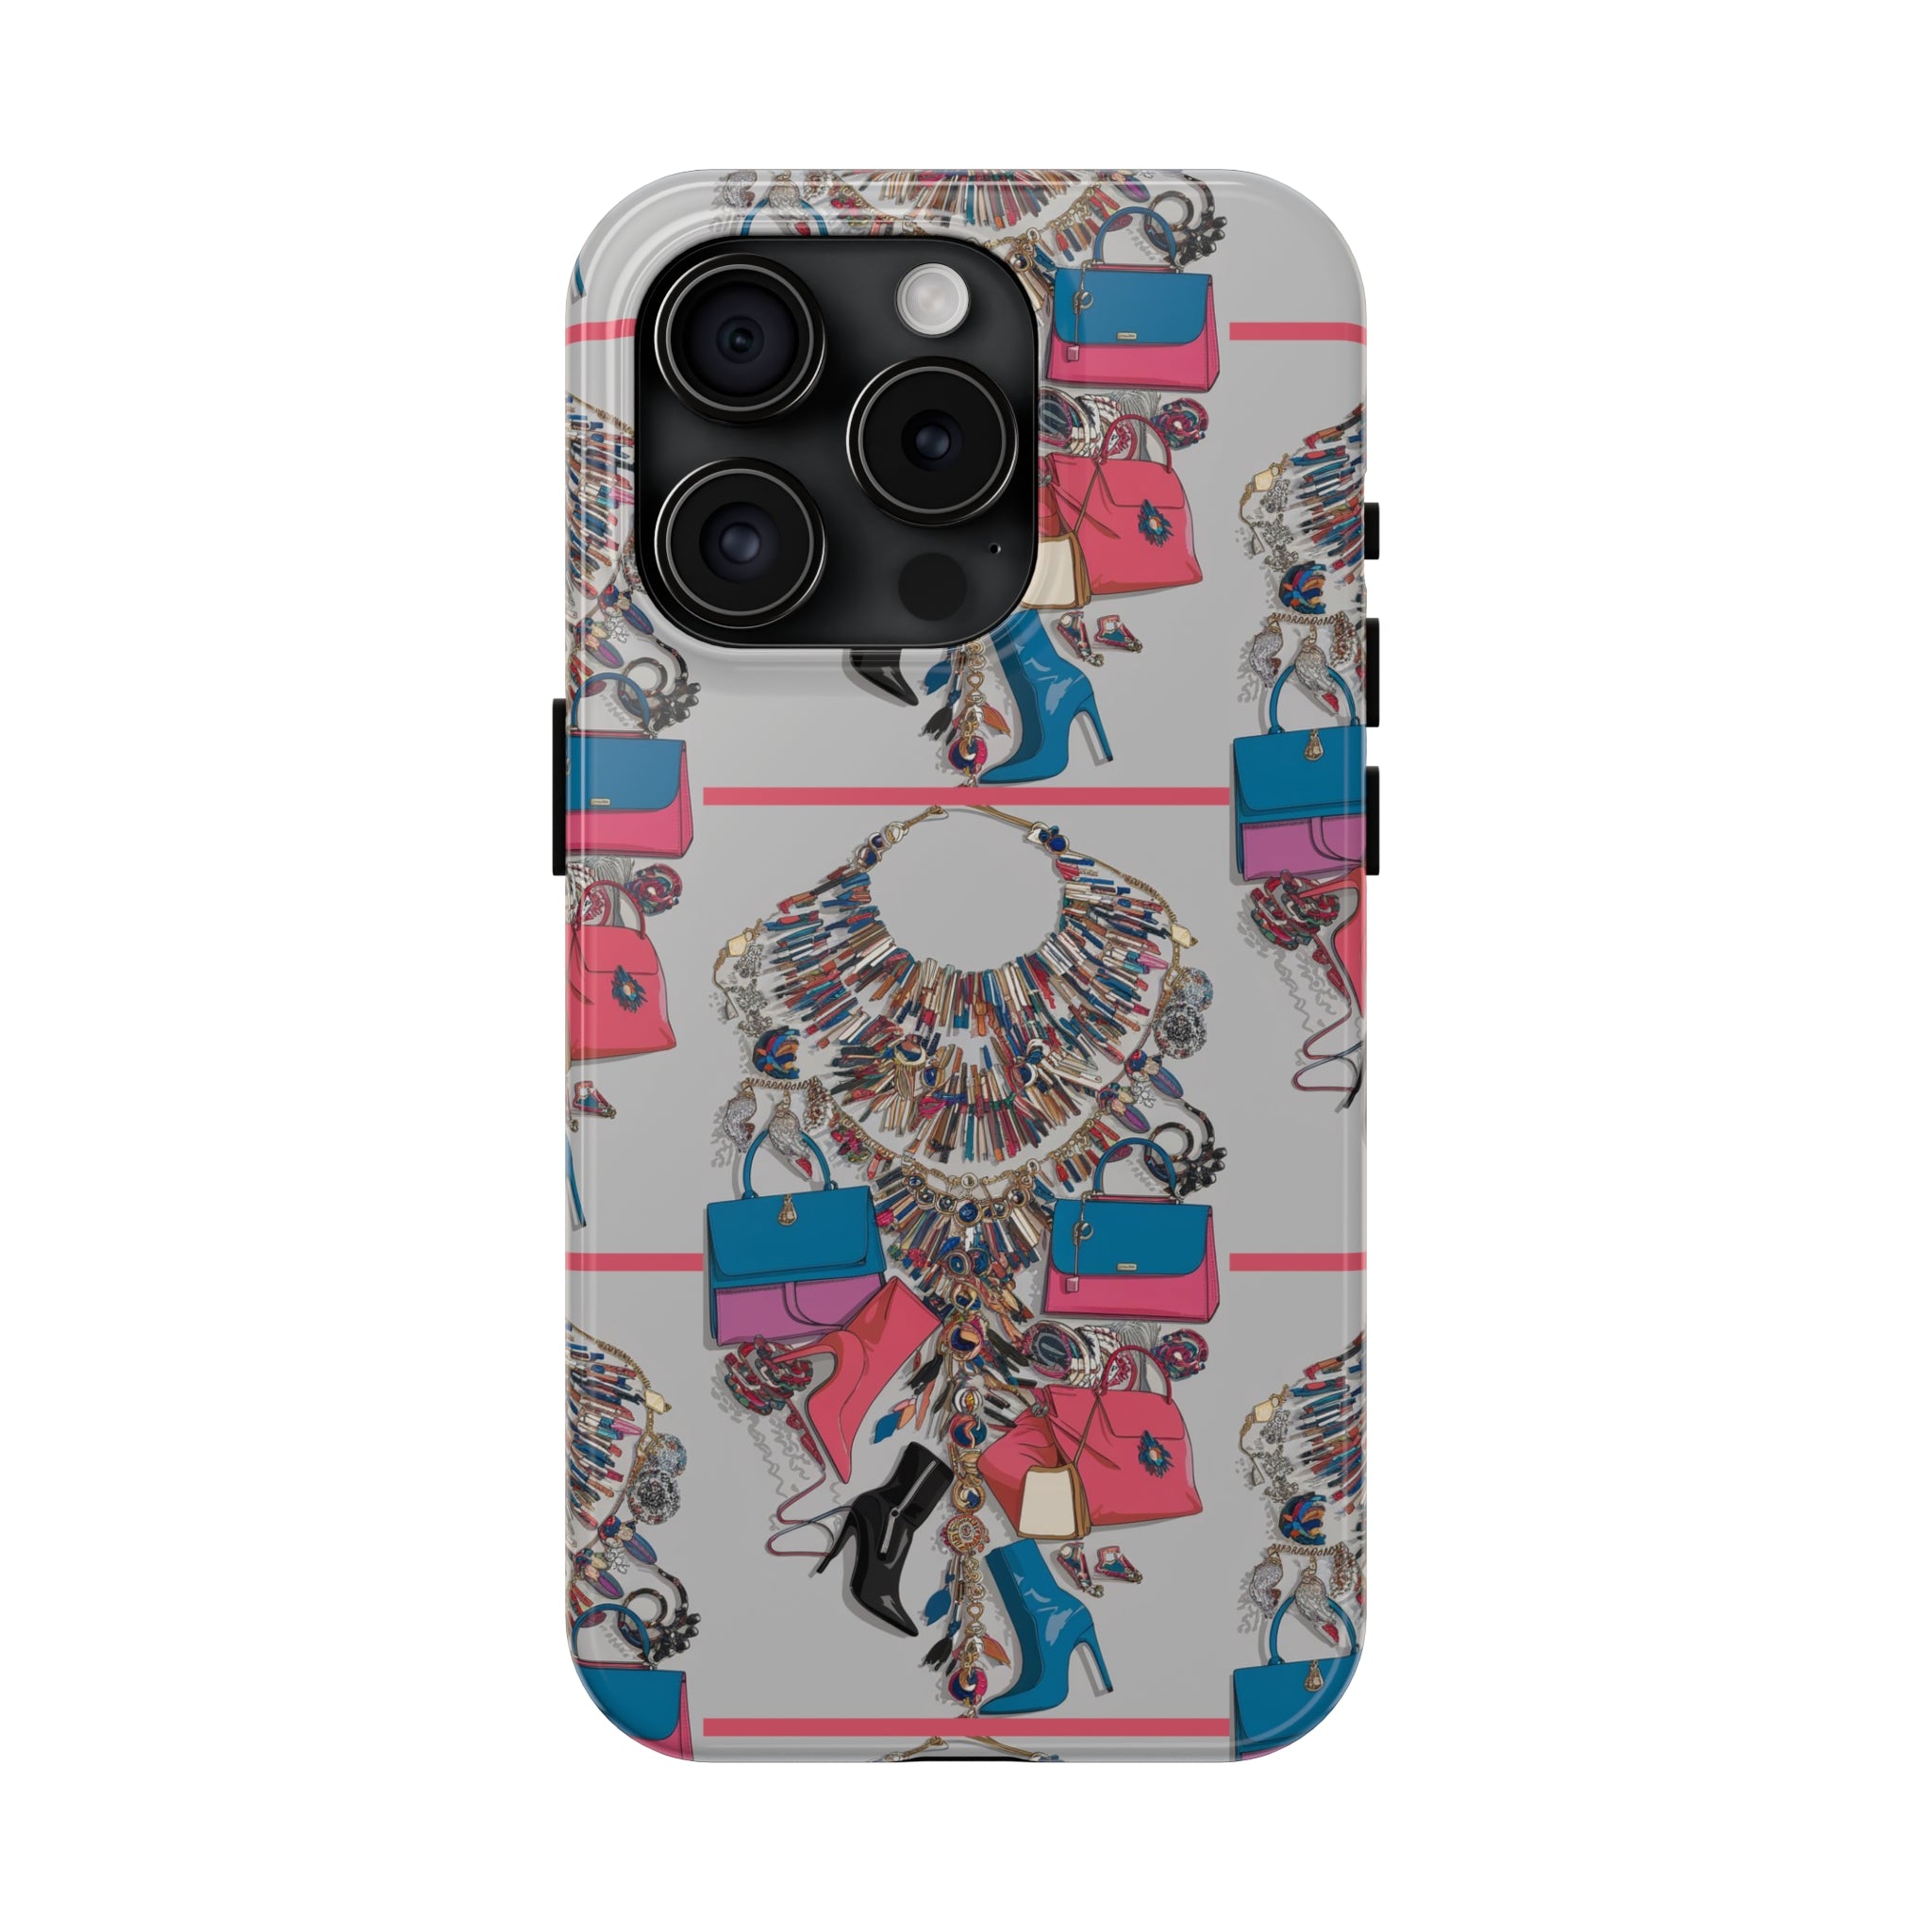 Couture - Tough Phone Cases